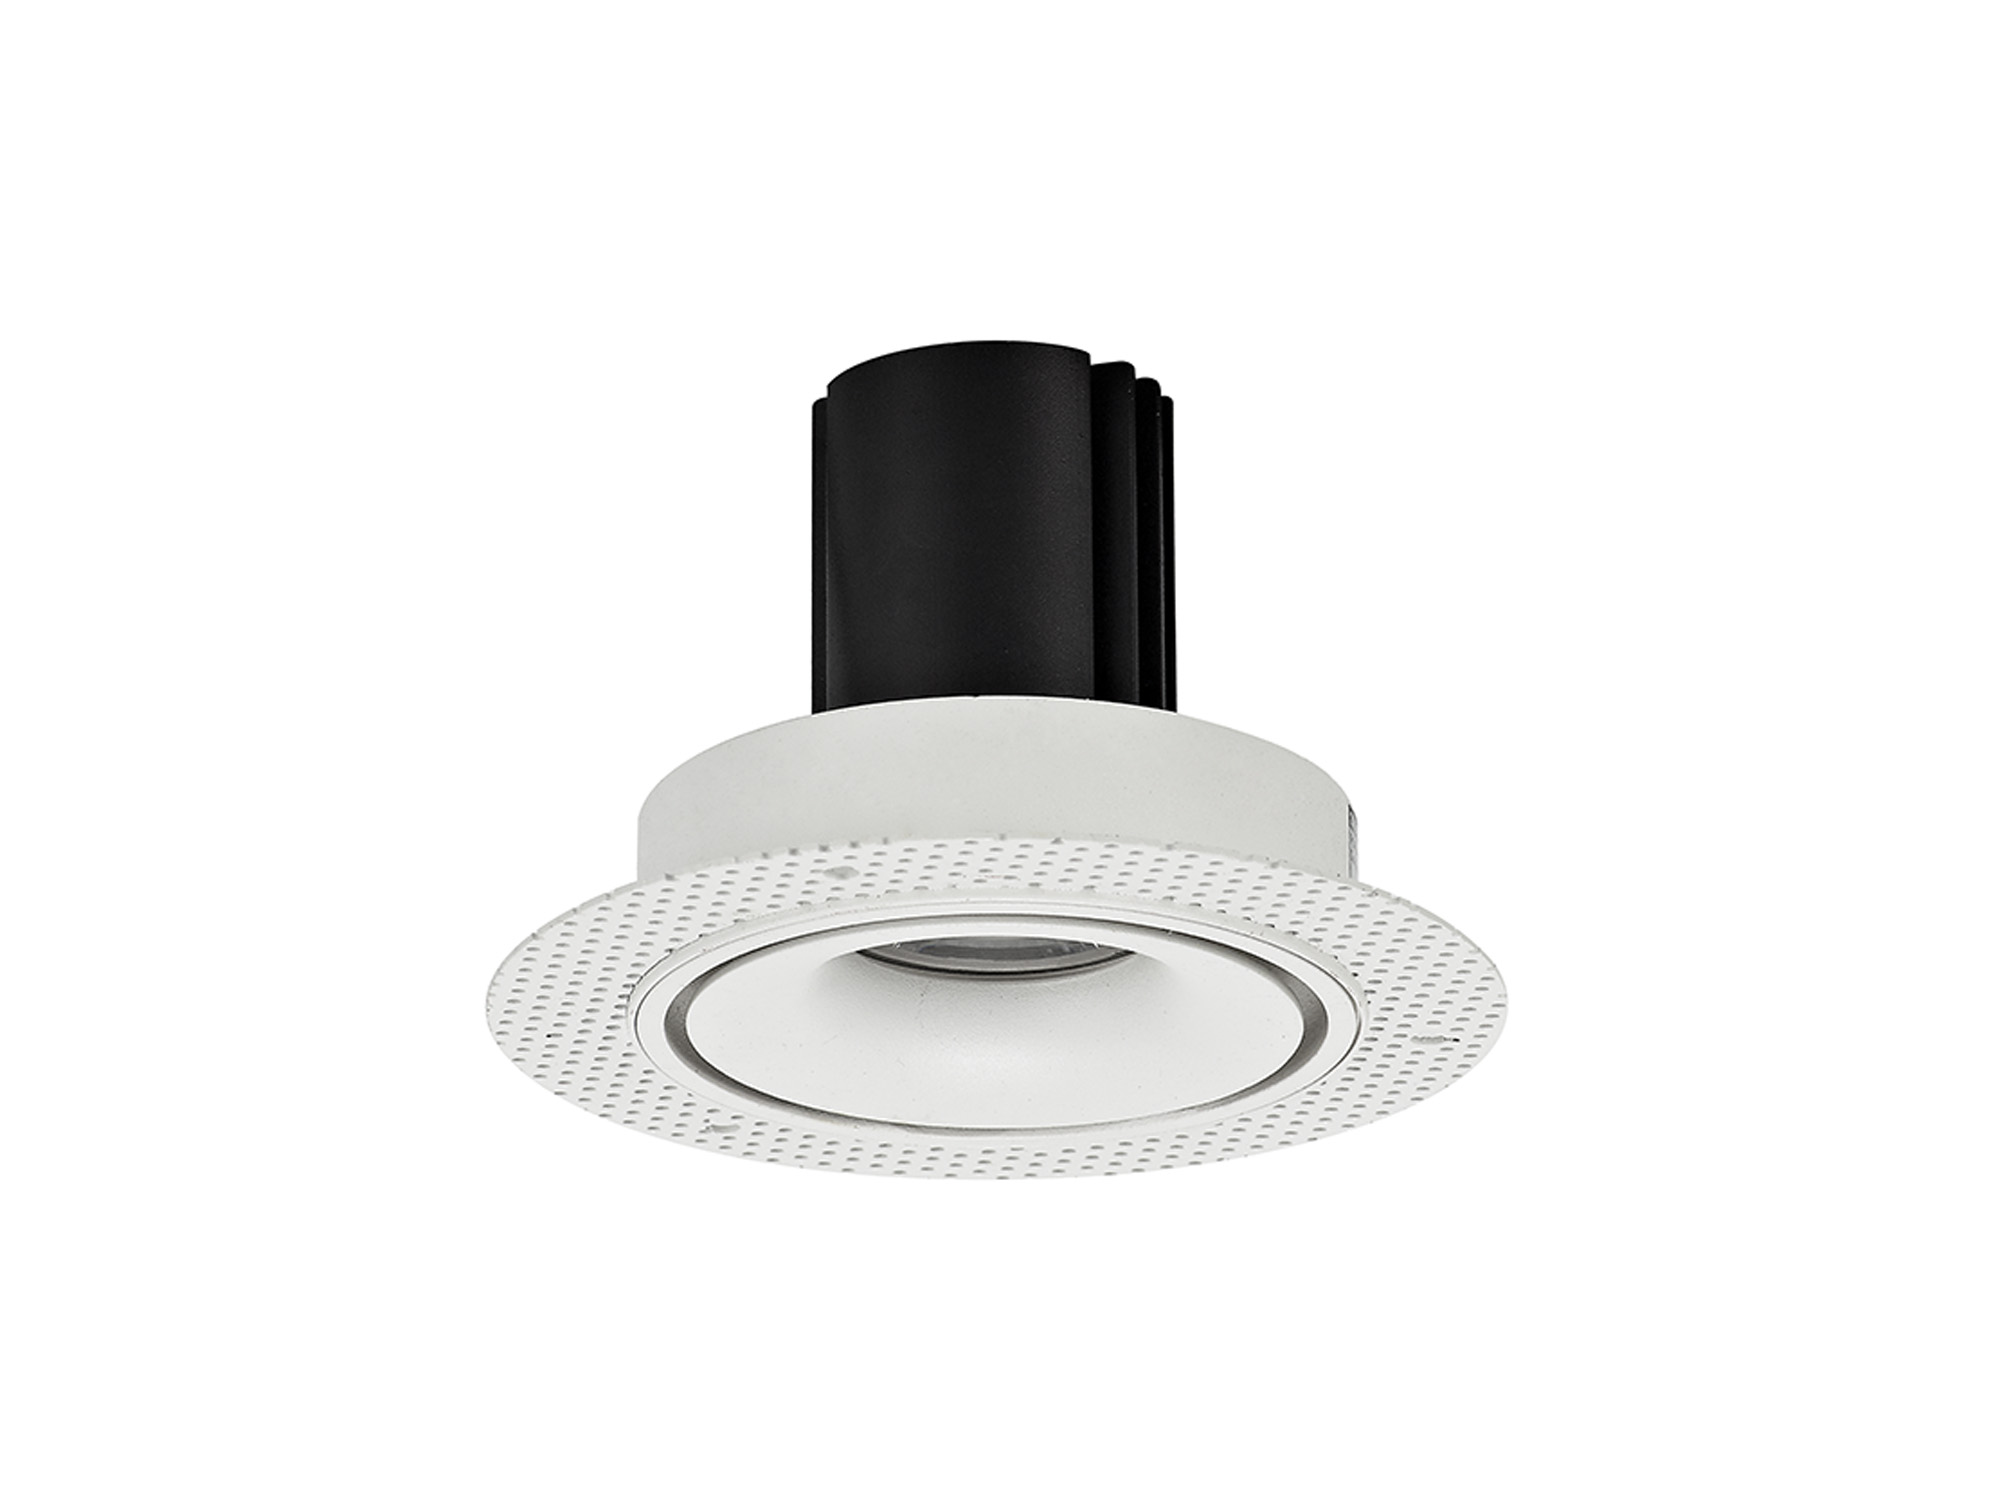 DM202162  Bolor T 12 Tridonic Powered 12W 2700K 1200lm 12° CRI>90 LED Engine White/White Trimless Fixed Recessed Spotlight, IP20